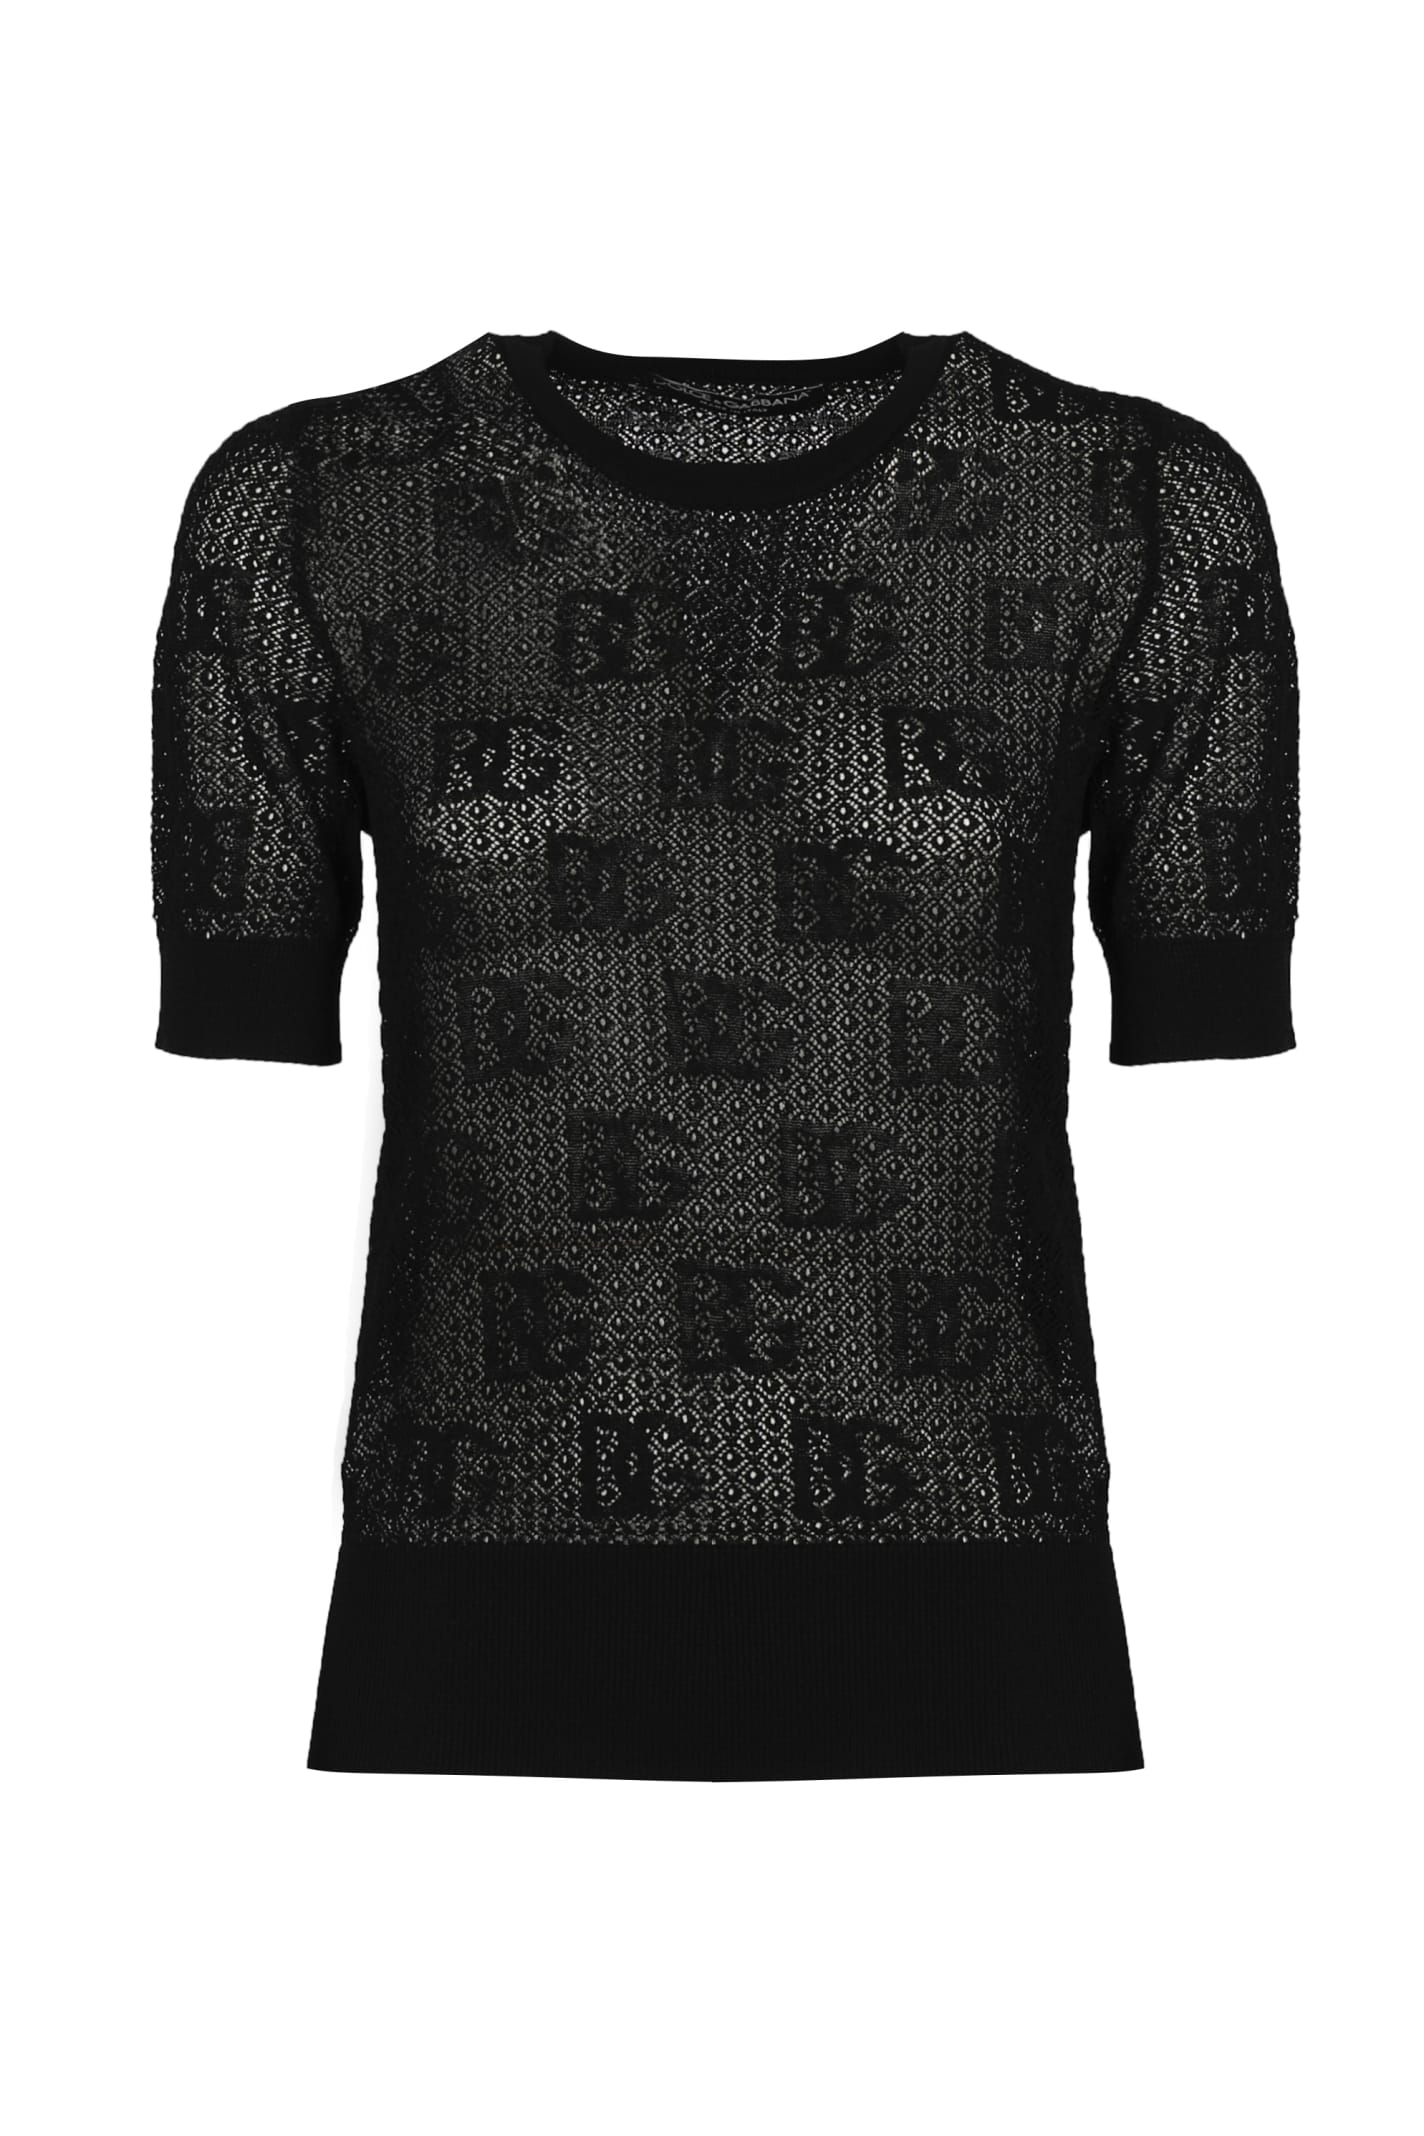 DOLCE & GABBANA SHORT SLEEVED SWEATER IN LACE STITCH WITH DG LOGO